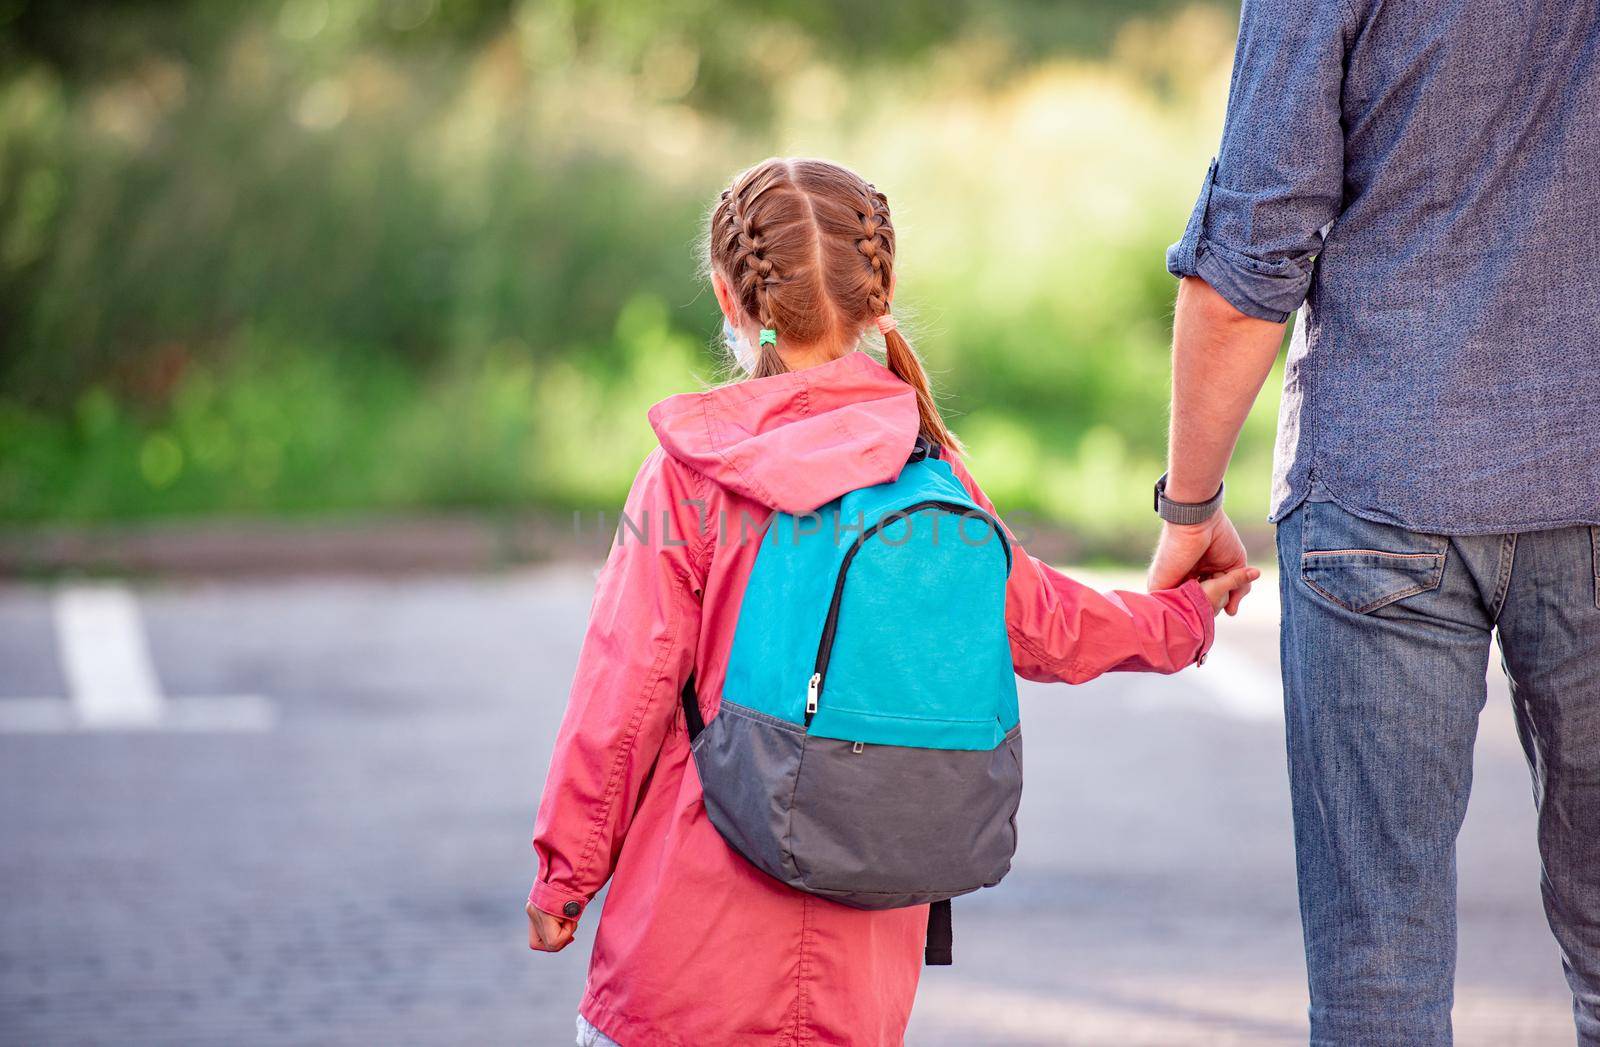 Rear view of little girl with backpack holding father's hand